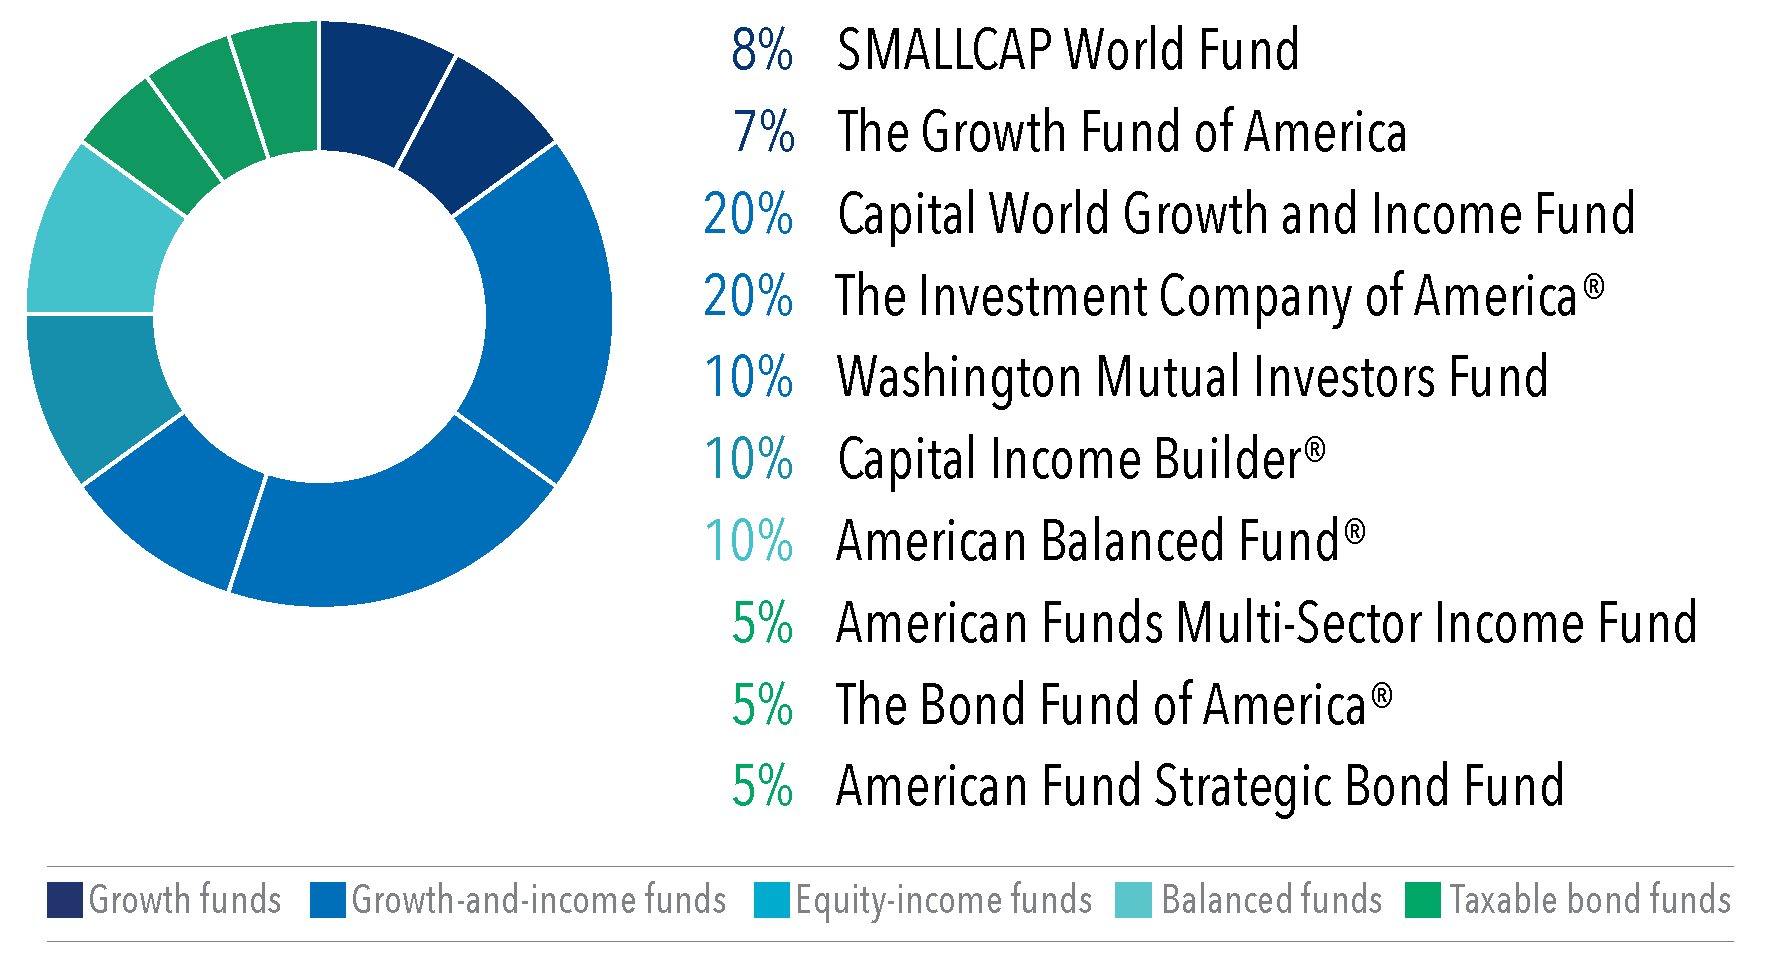 Donut chart displays a target allocation of 8% to SMALLCAP World Fund, 7% to The Growth Fund of America, 20% to Capital World Growth and Income Fund, 20% to The Investment Company of America, 10% to Washington Mutual Investors Fund, 10% to Capital Income Builder, 10% to American Balanced Fund, 5% to American Funds Multi-Sector Income Fund, 5% to The Bond Fund of America, 5% to American Funds Strategic Bond Fund.